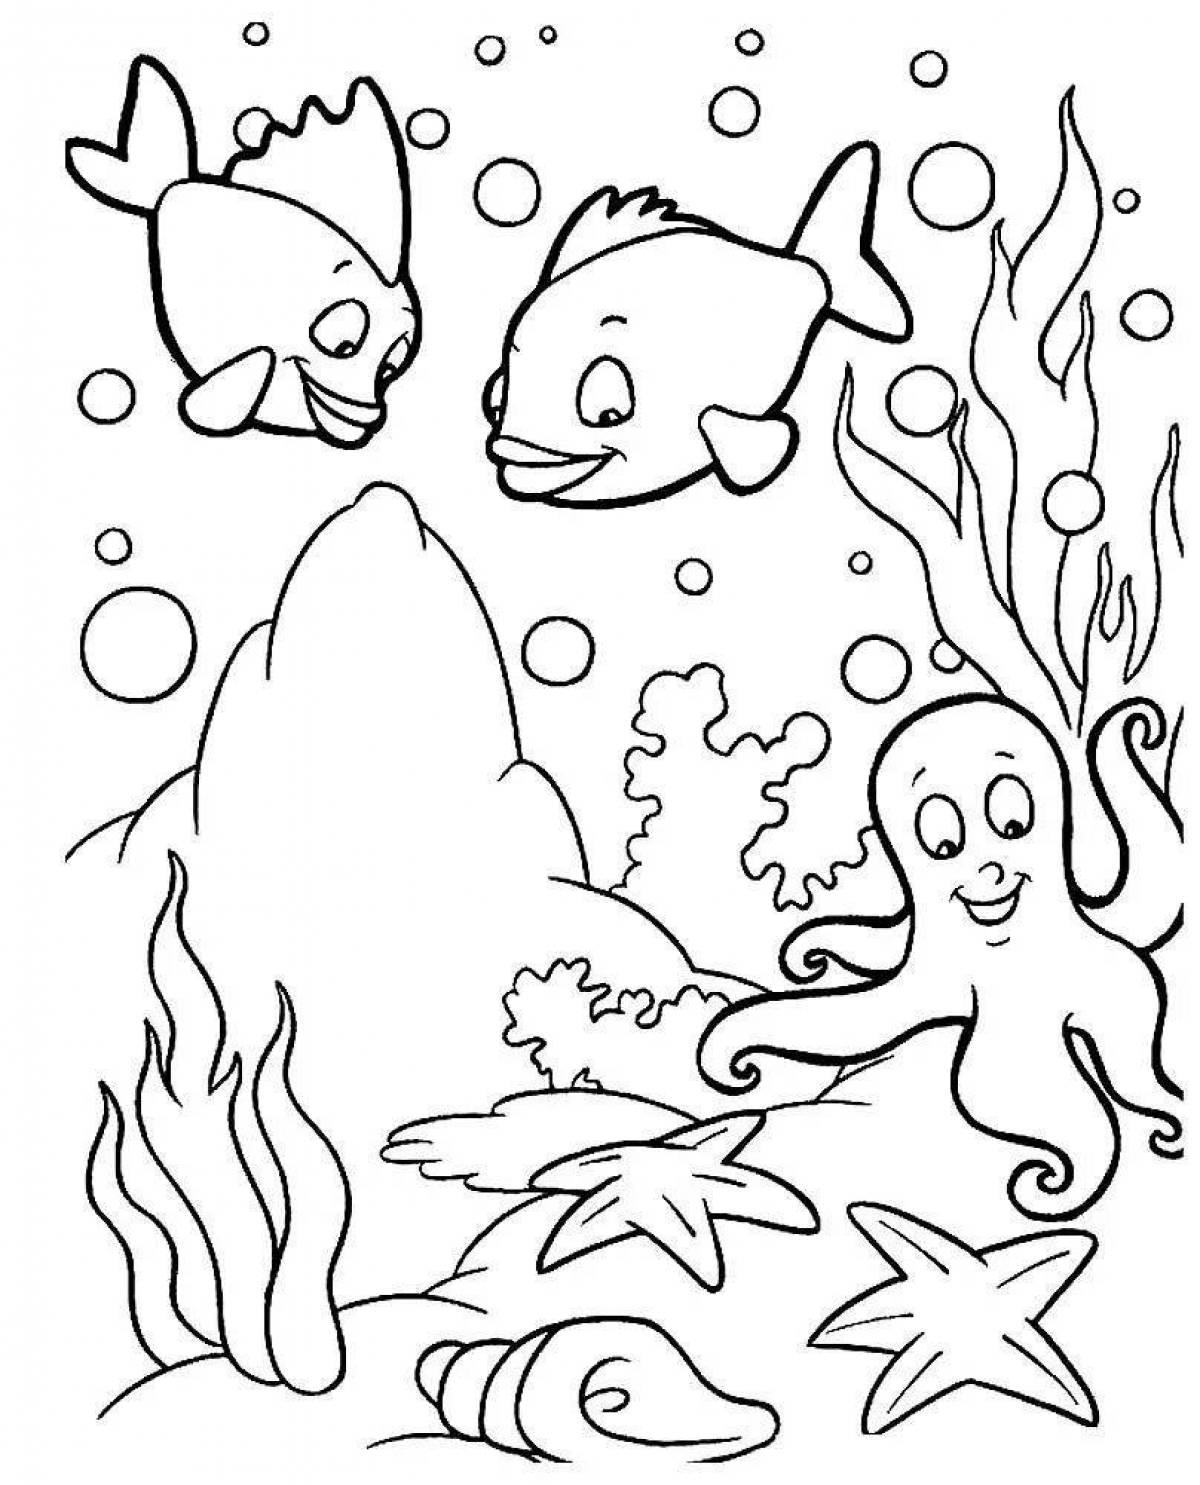 Colorful underwater world coloring page